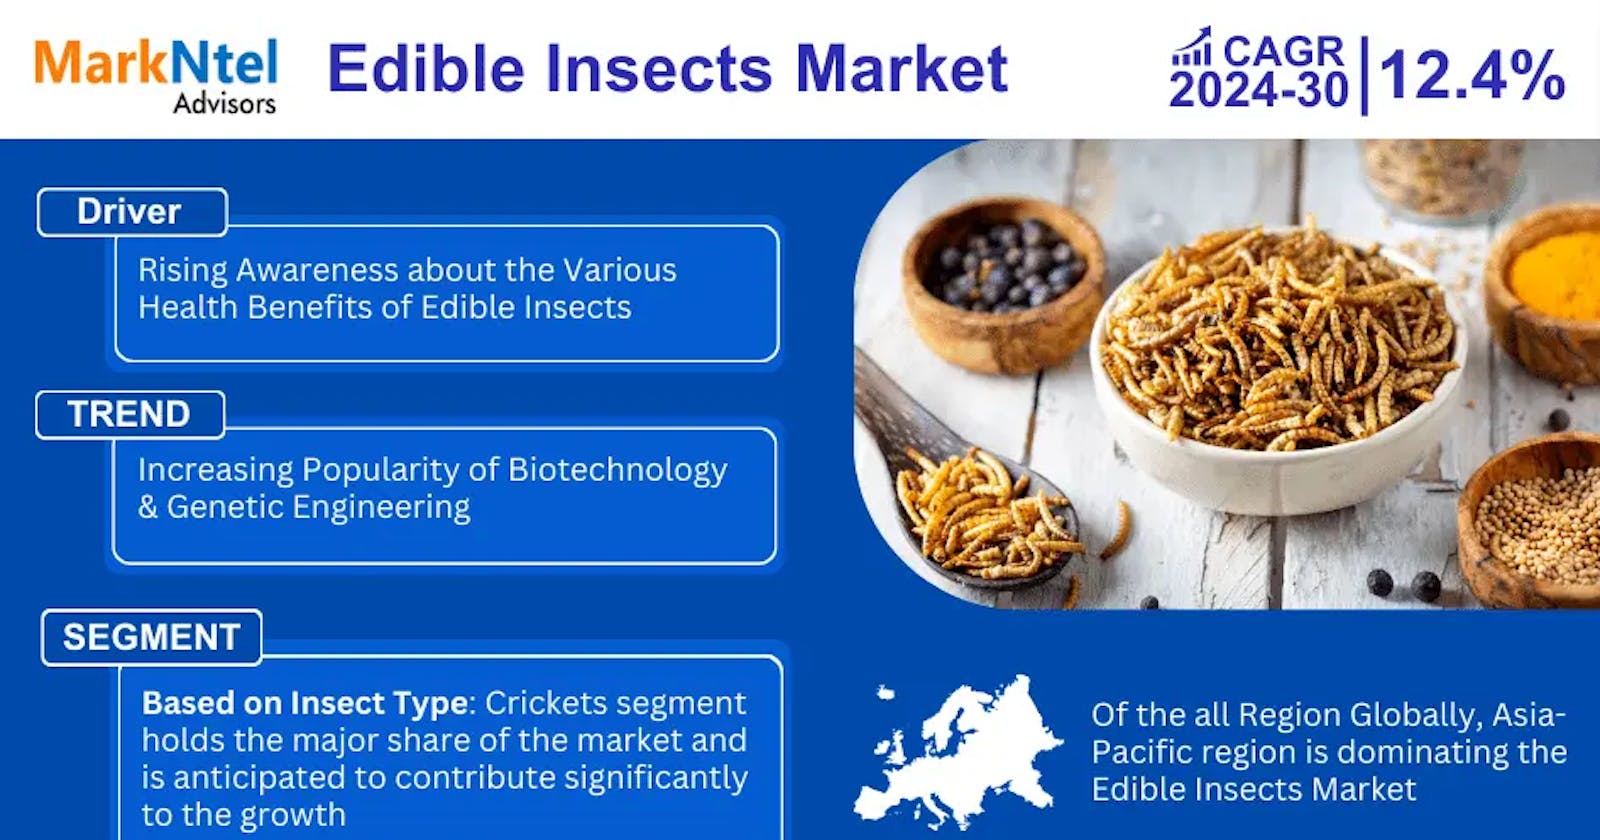 Edible Insects Market Anticipates Robust 12.4% CAGR for 2024-30